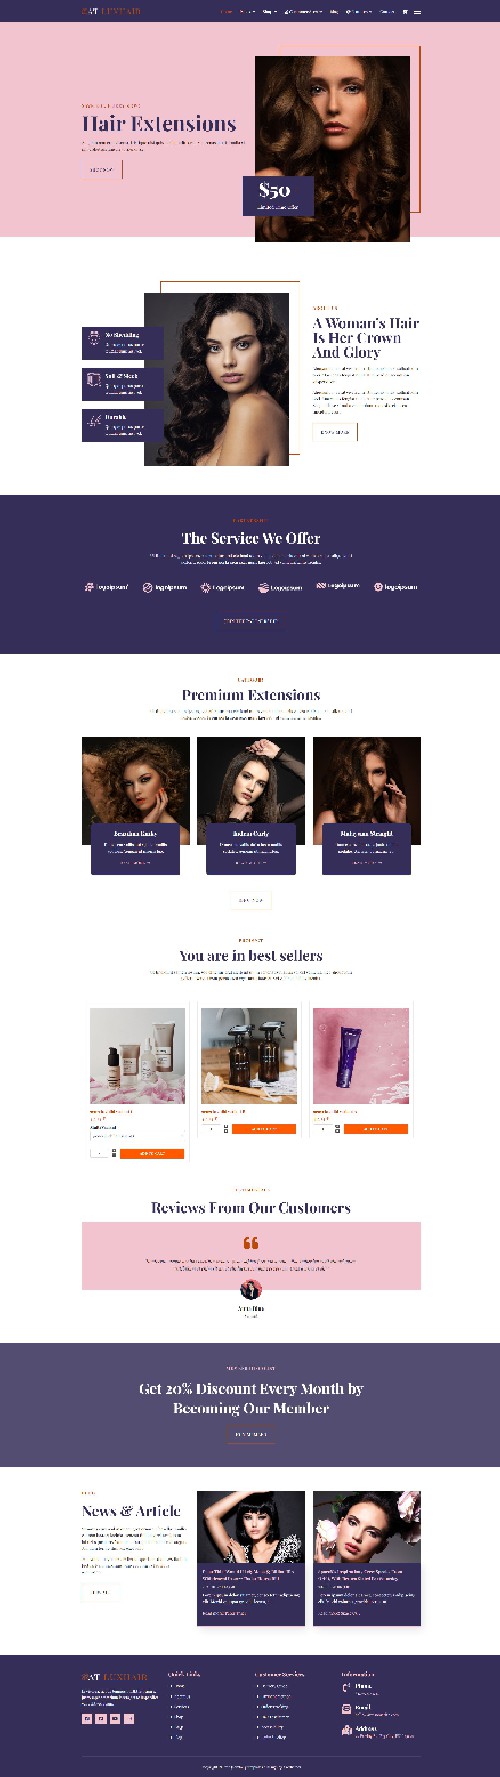 Luxhair - Joomla 4 template for hairdressers, hair salons